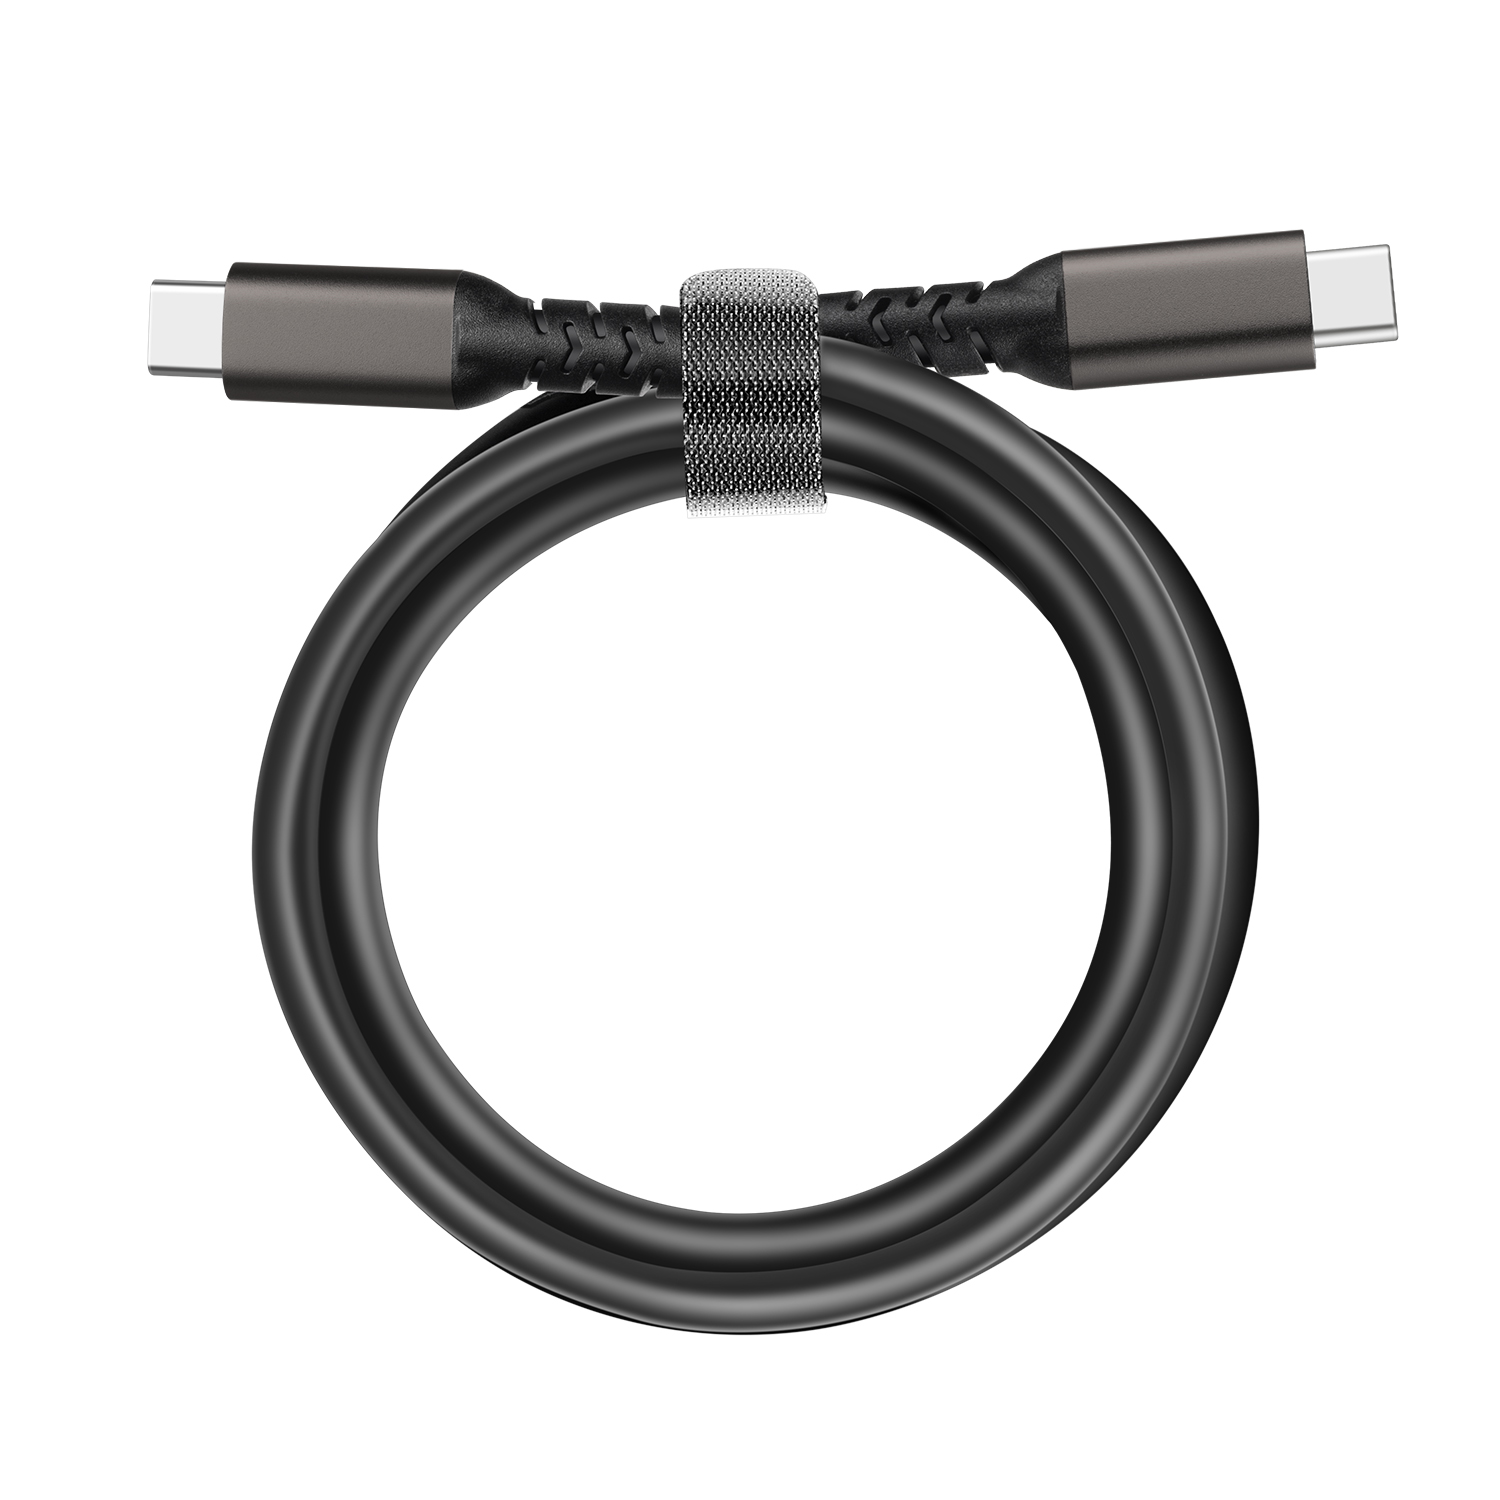 100W 20V 5A PD USB C Fast Charging Cable